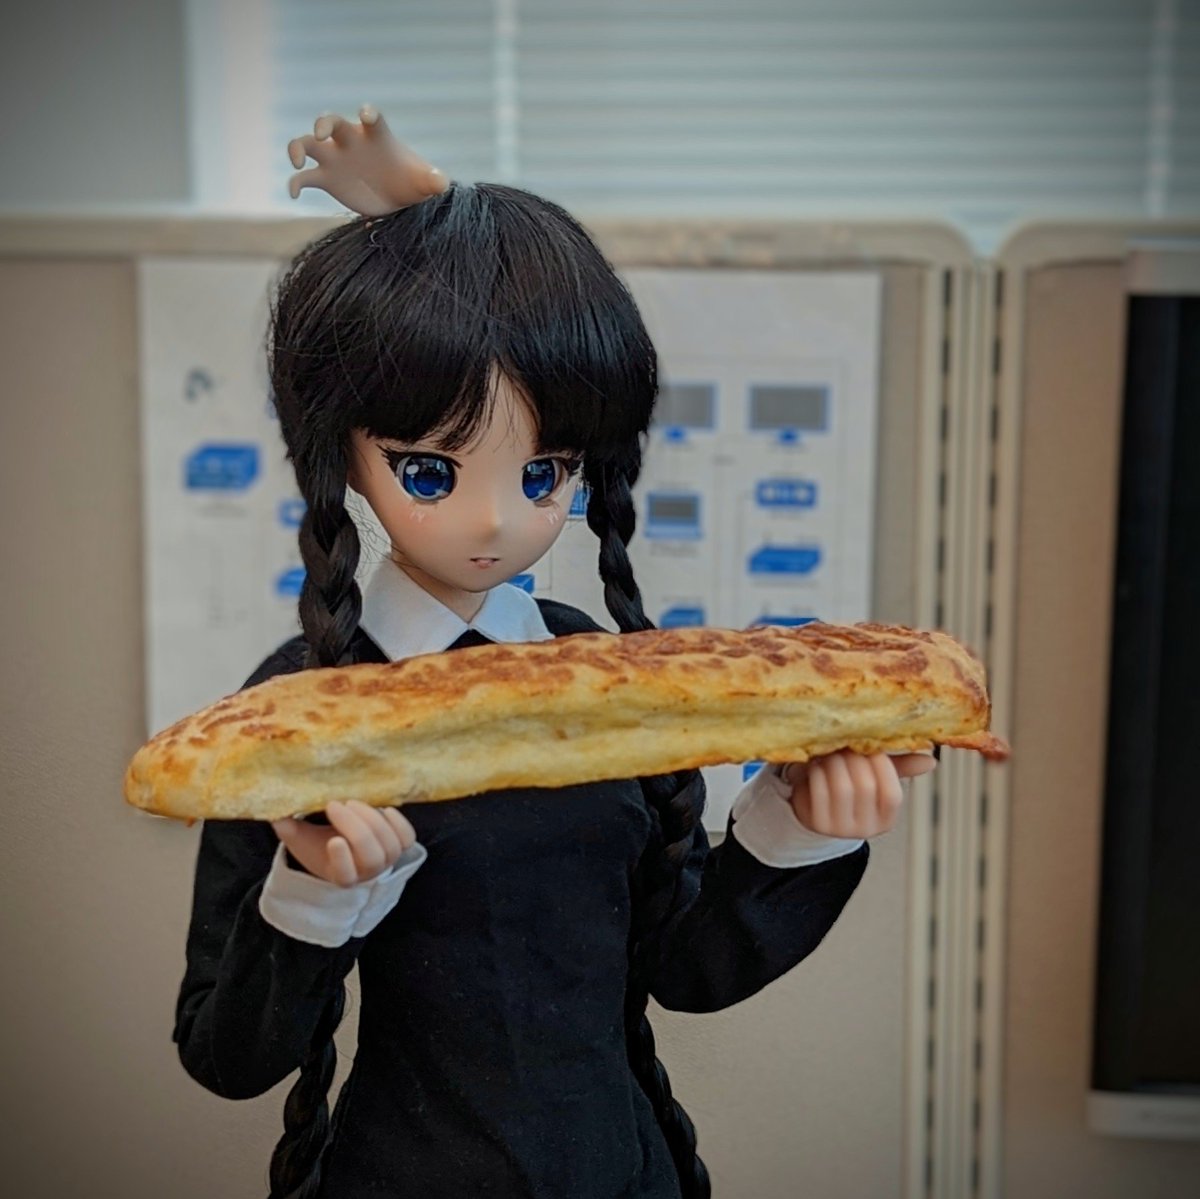 Special workplace guest “Wednesday” (Chitose can’t resist deli cheesesticks) 🥖🤤
.
#Chitose #Smartdoll #BJD  #cheesebread #cubicle #work #cubelife #corporate #cubefarm #office #Wednesday #Addams #AddamsFamily #goth #cosplay #WednesdayAddams #cosplayer #costume